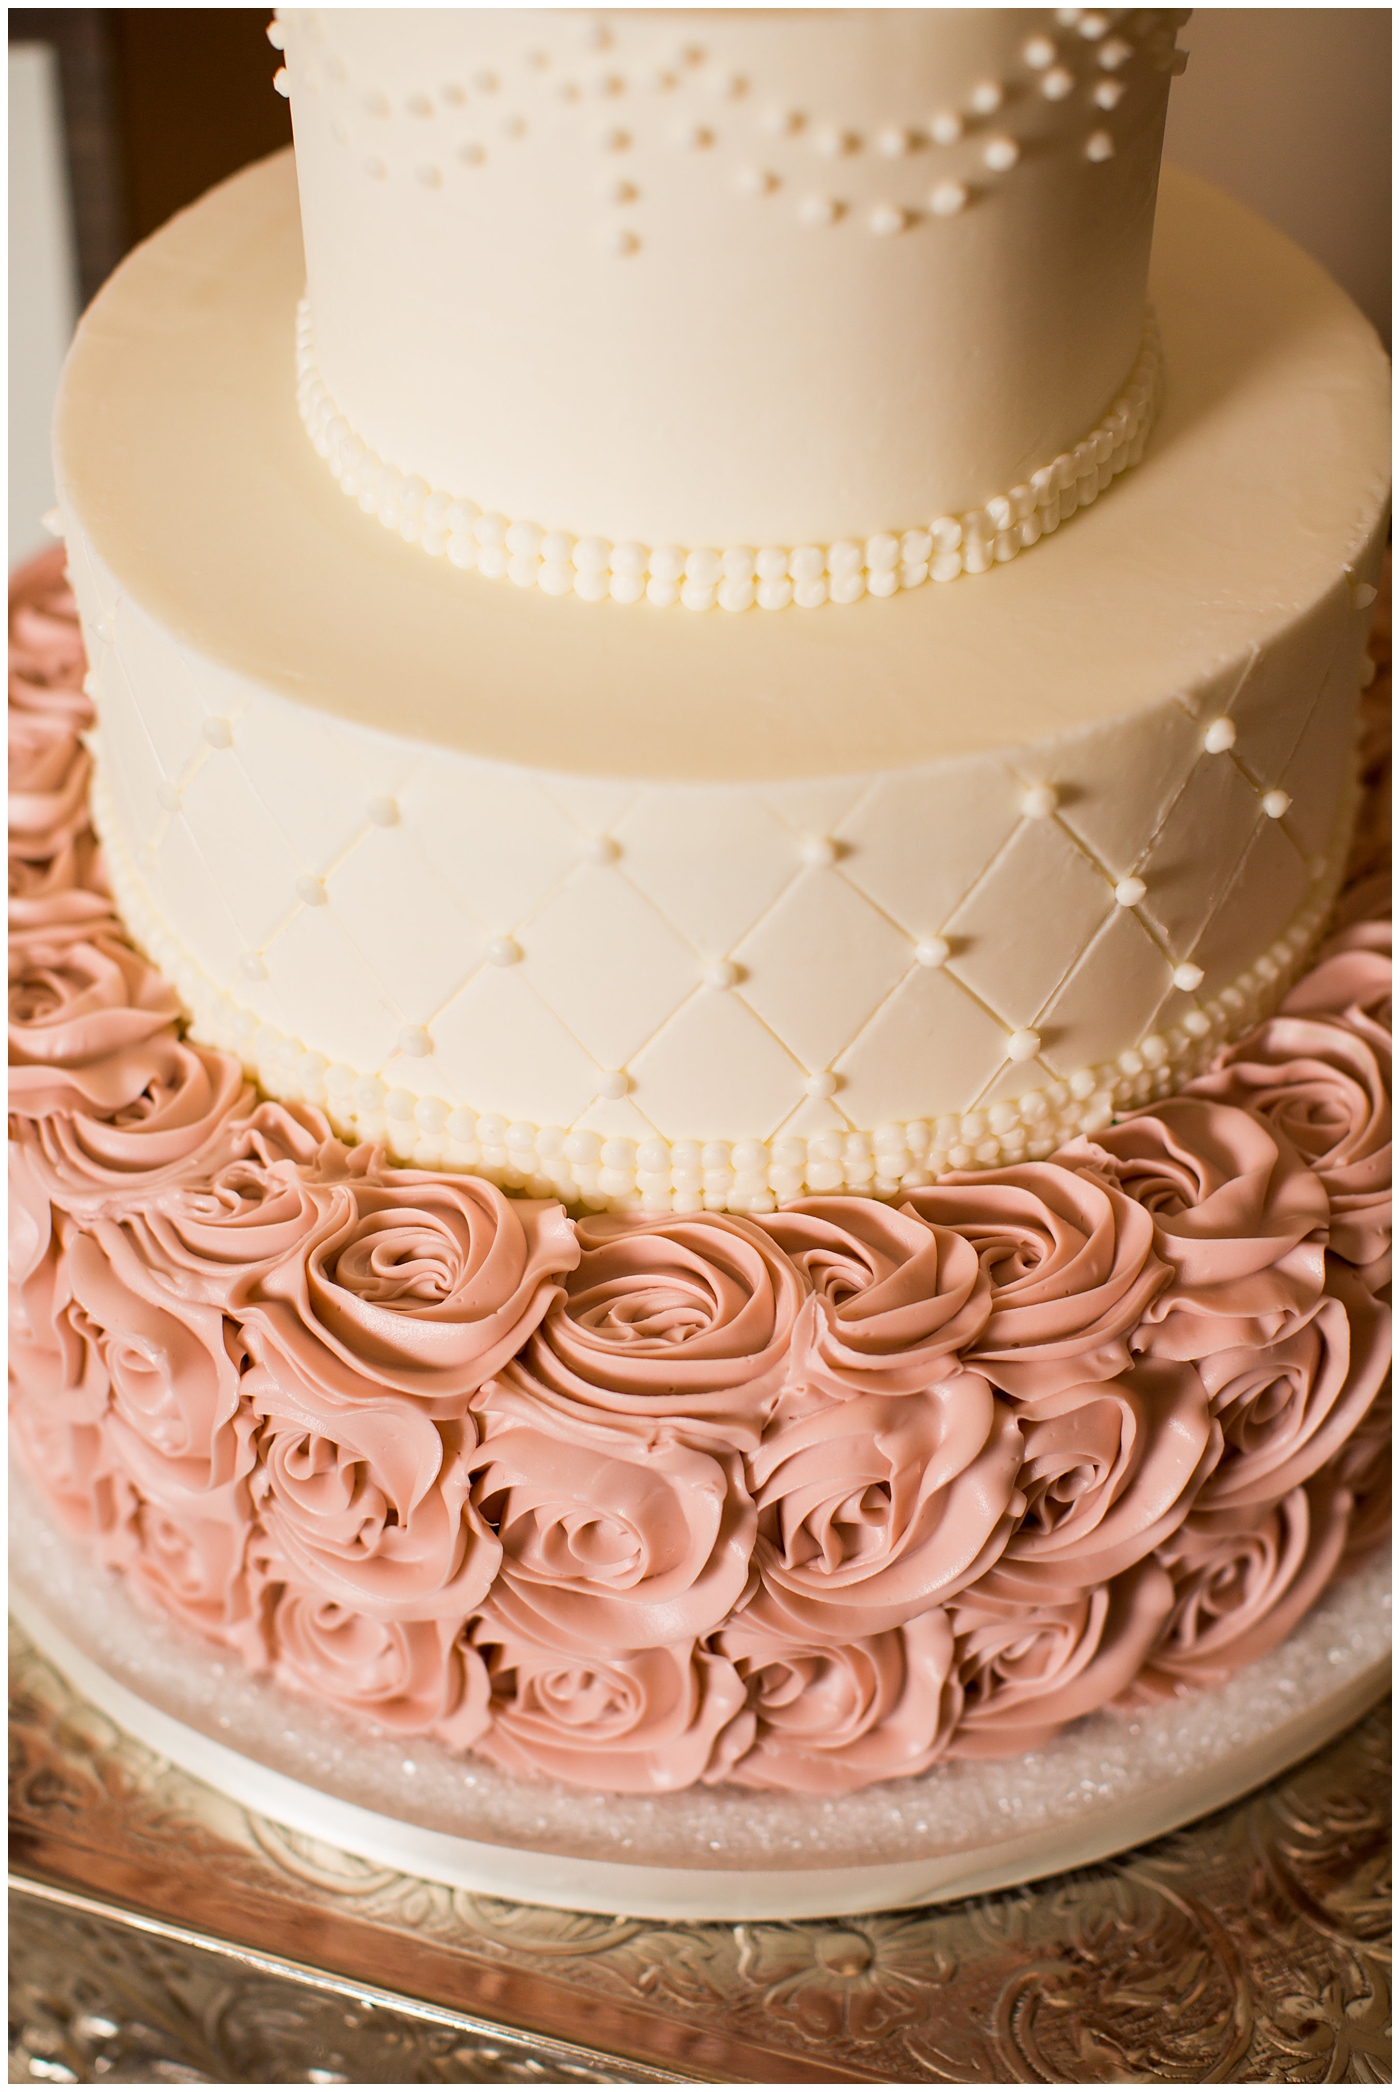 cream and white with pink frosting florals wedding cake with gold name cutout cake topper